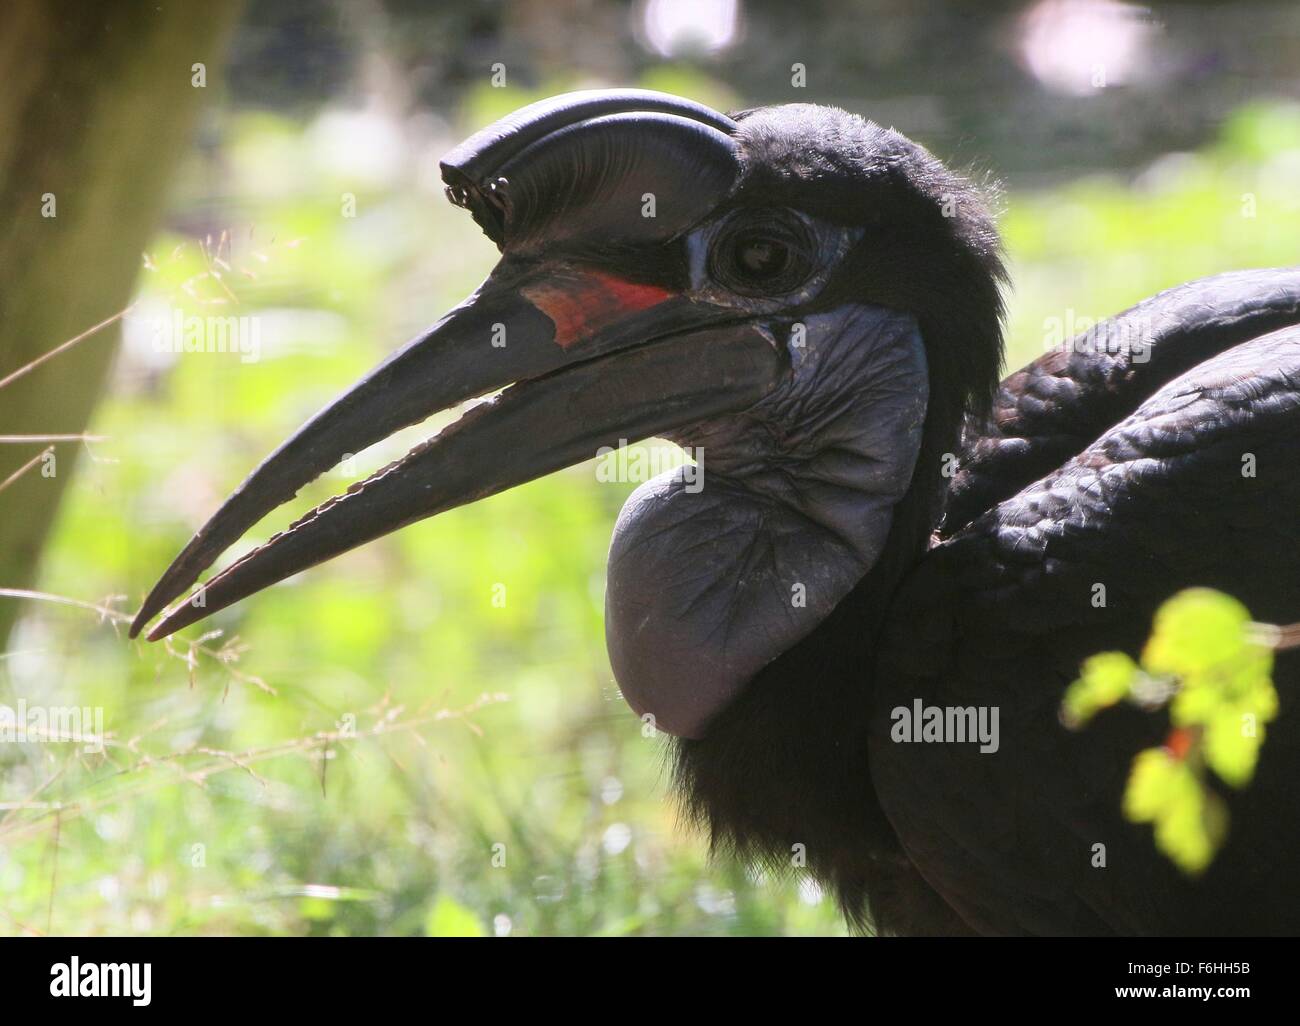 Female Abyssinian or Northern Ground hornbill (Bucorvus abyssinicus), seen in profile Stock Photo